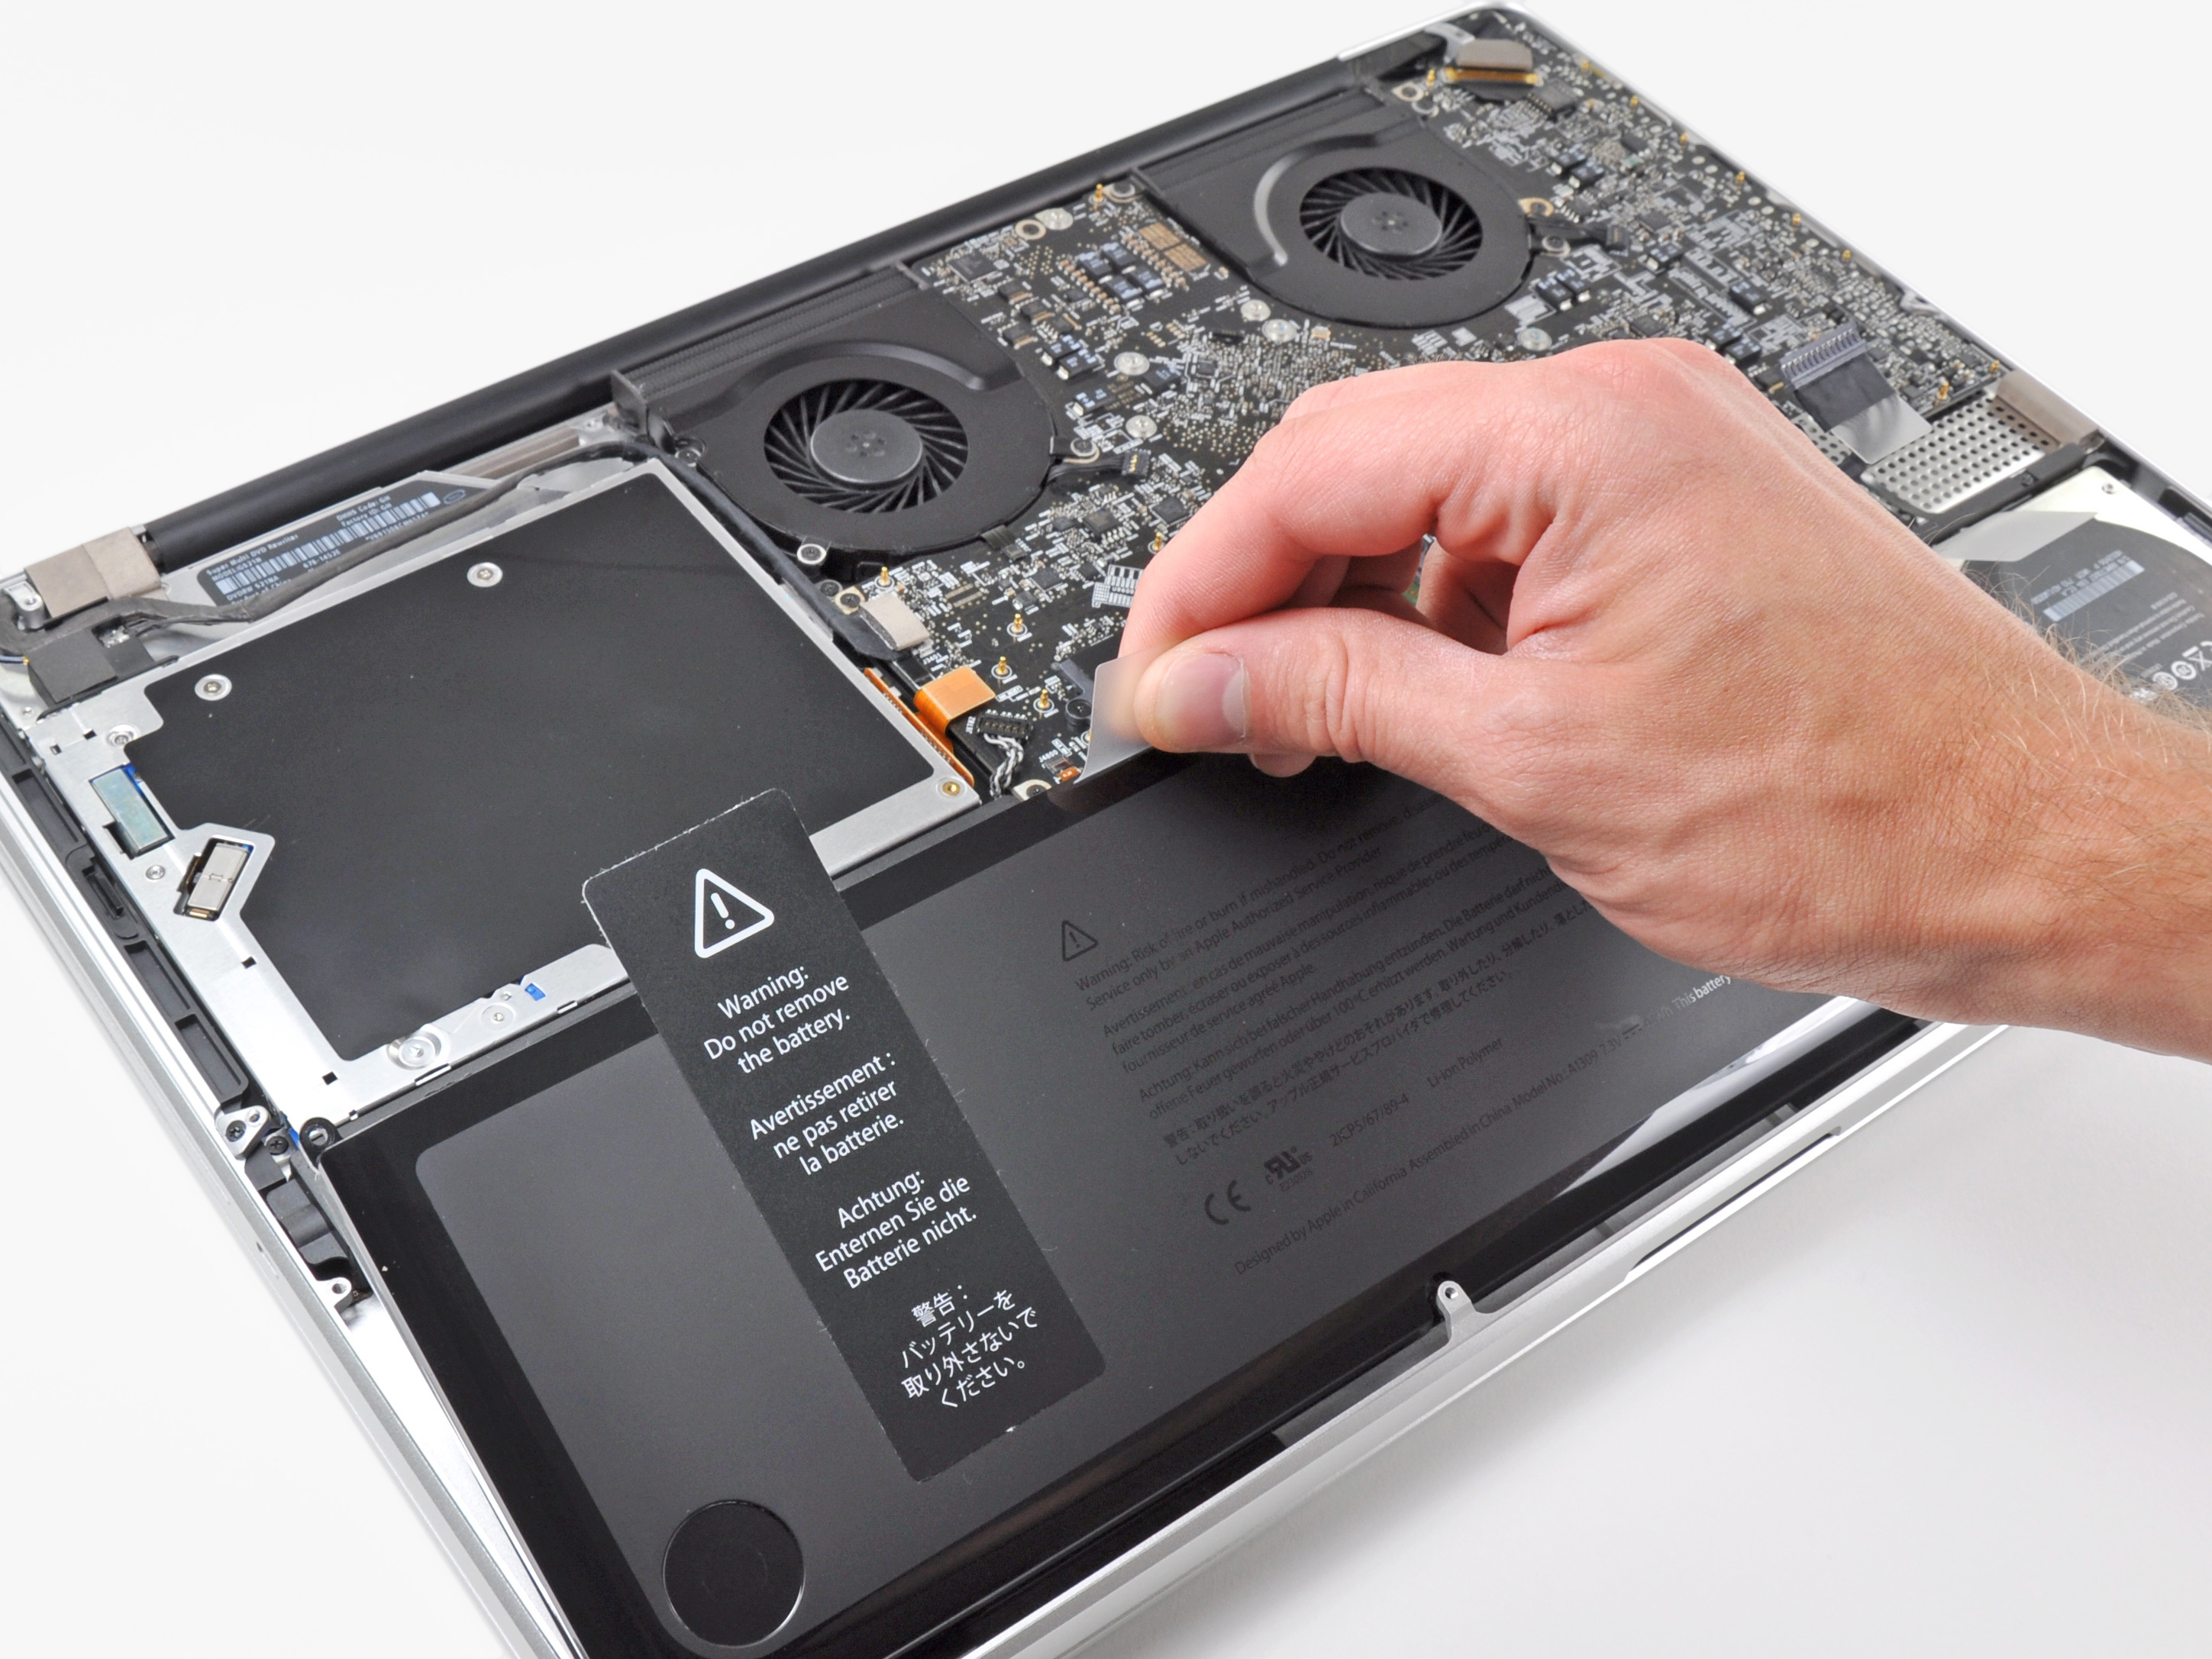 The FAA has banned the MacBook Pros with faulty batteries from flights